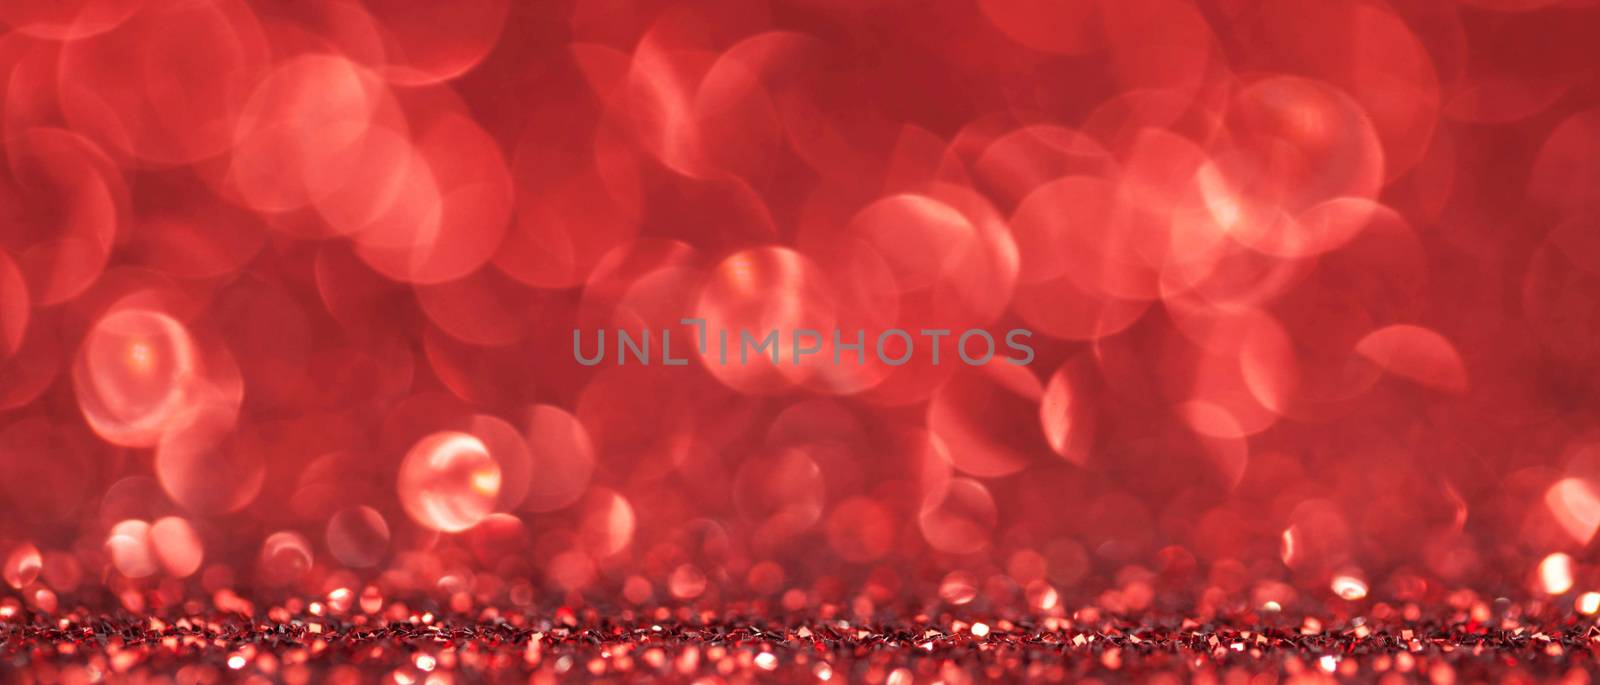 Abstract red glitter background by Yellowj